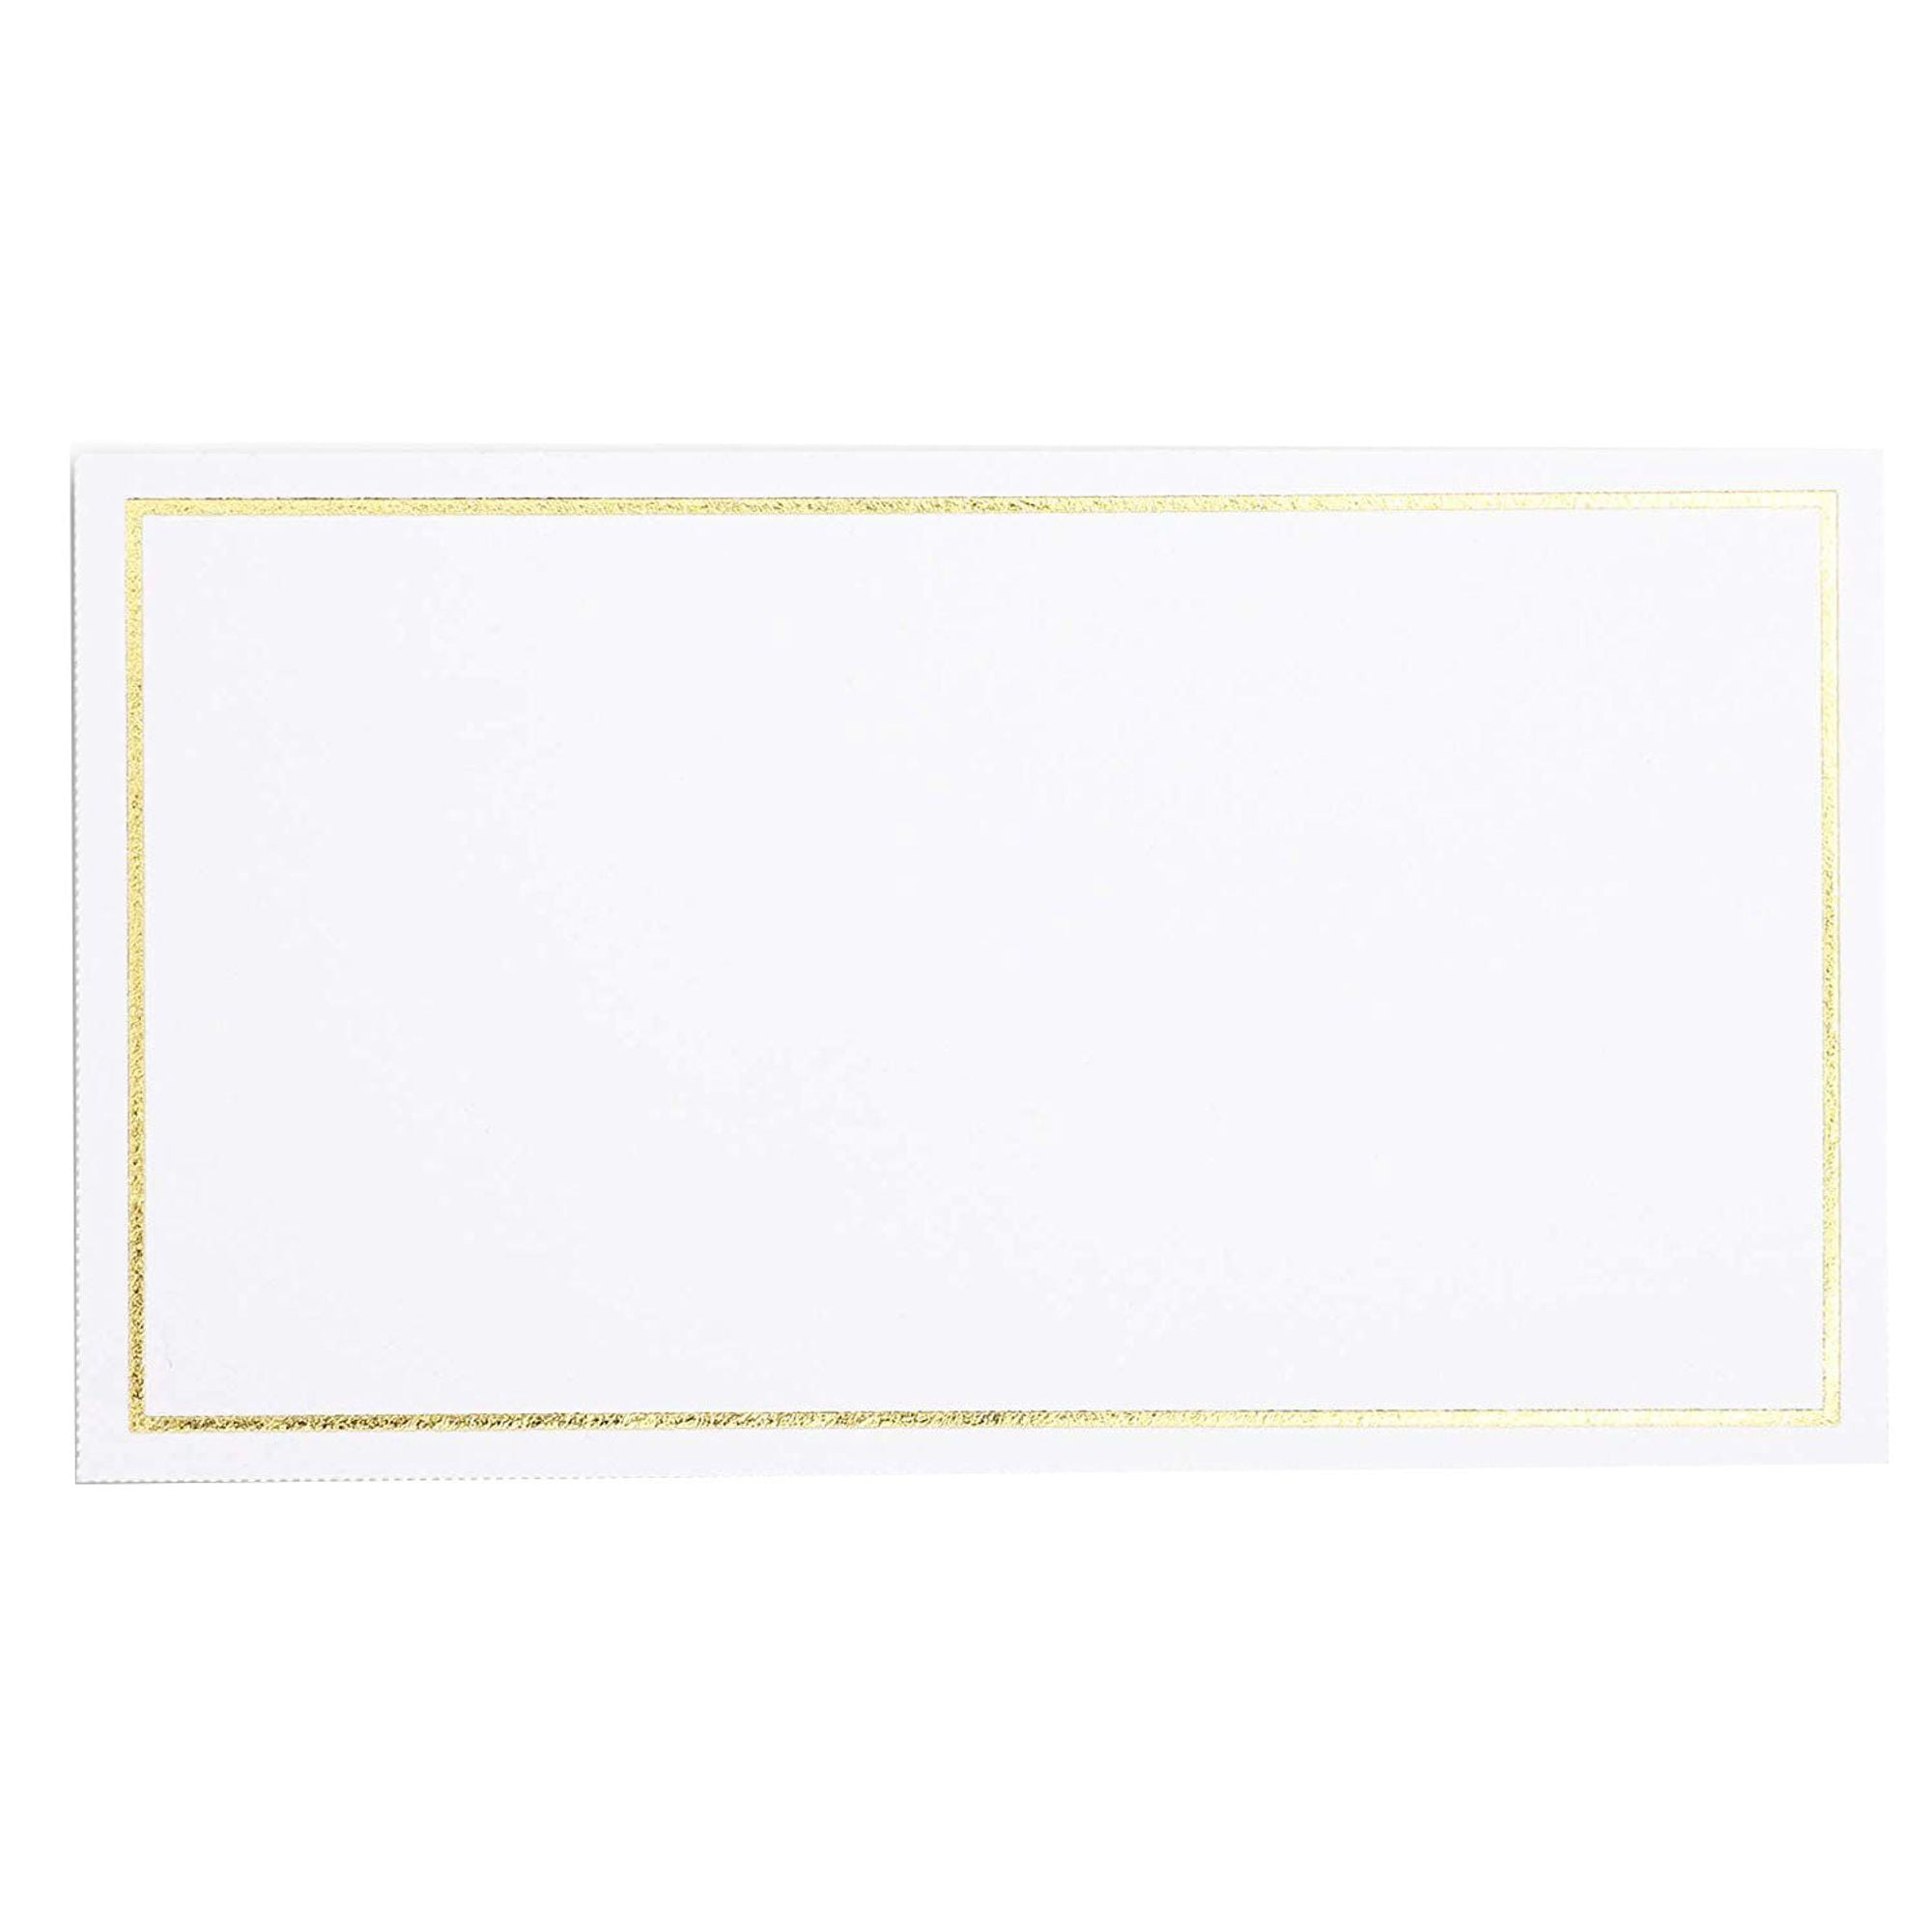 100 Sheets 1000 Cards Printable Business Card Ivory w/ White Foil, Heavyweight Card Stock Blank ...